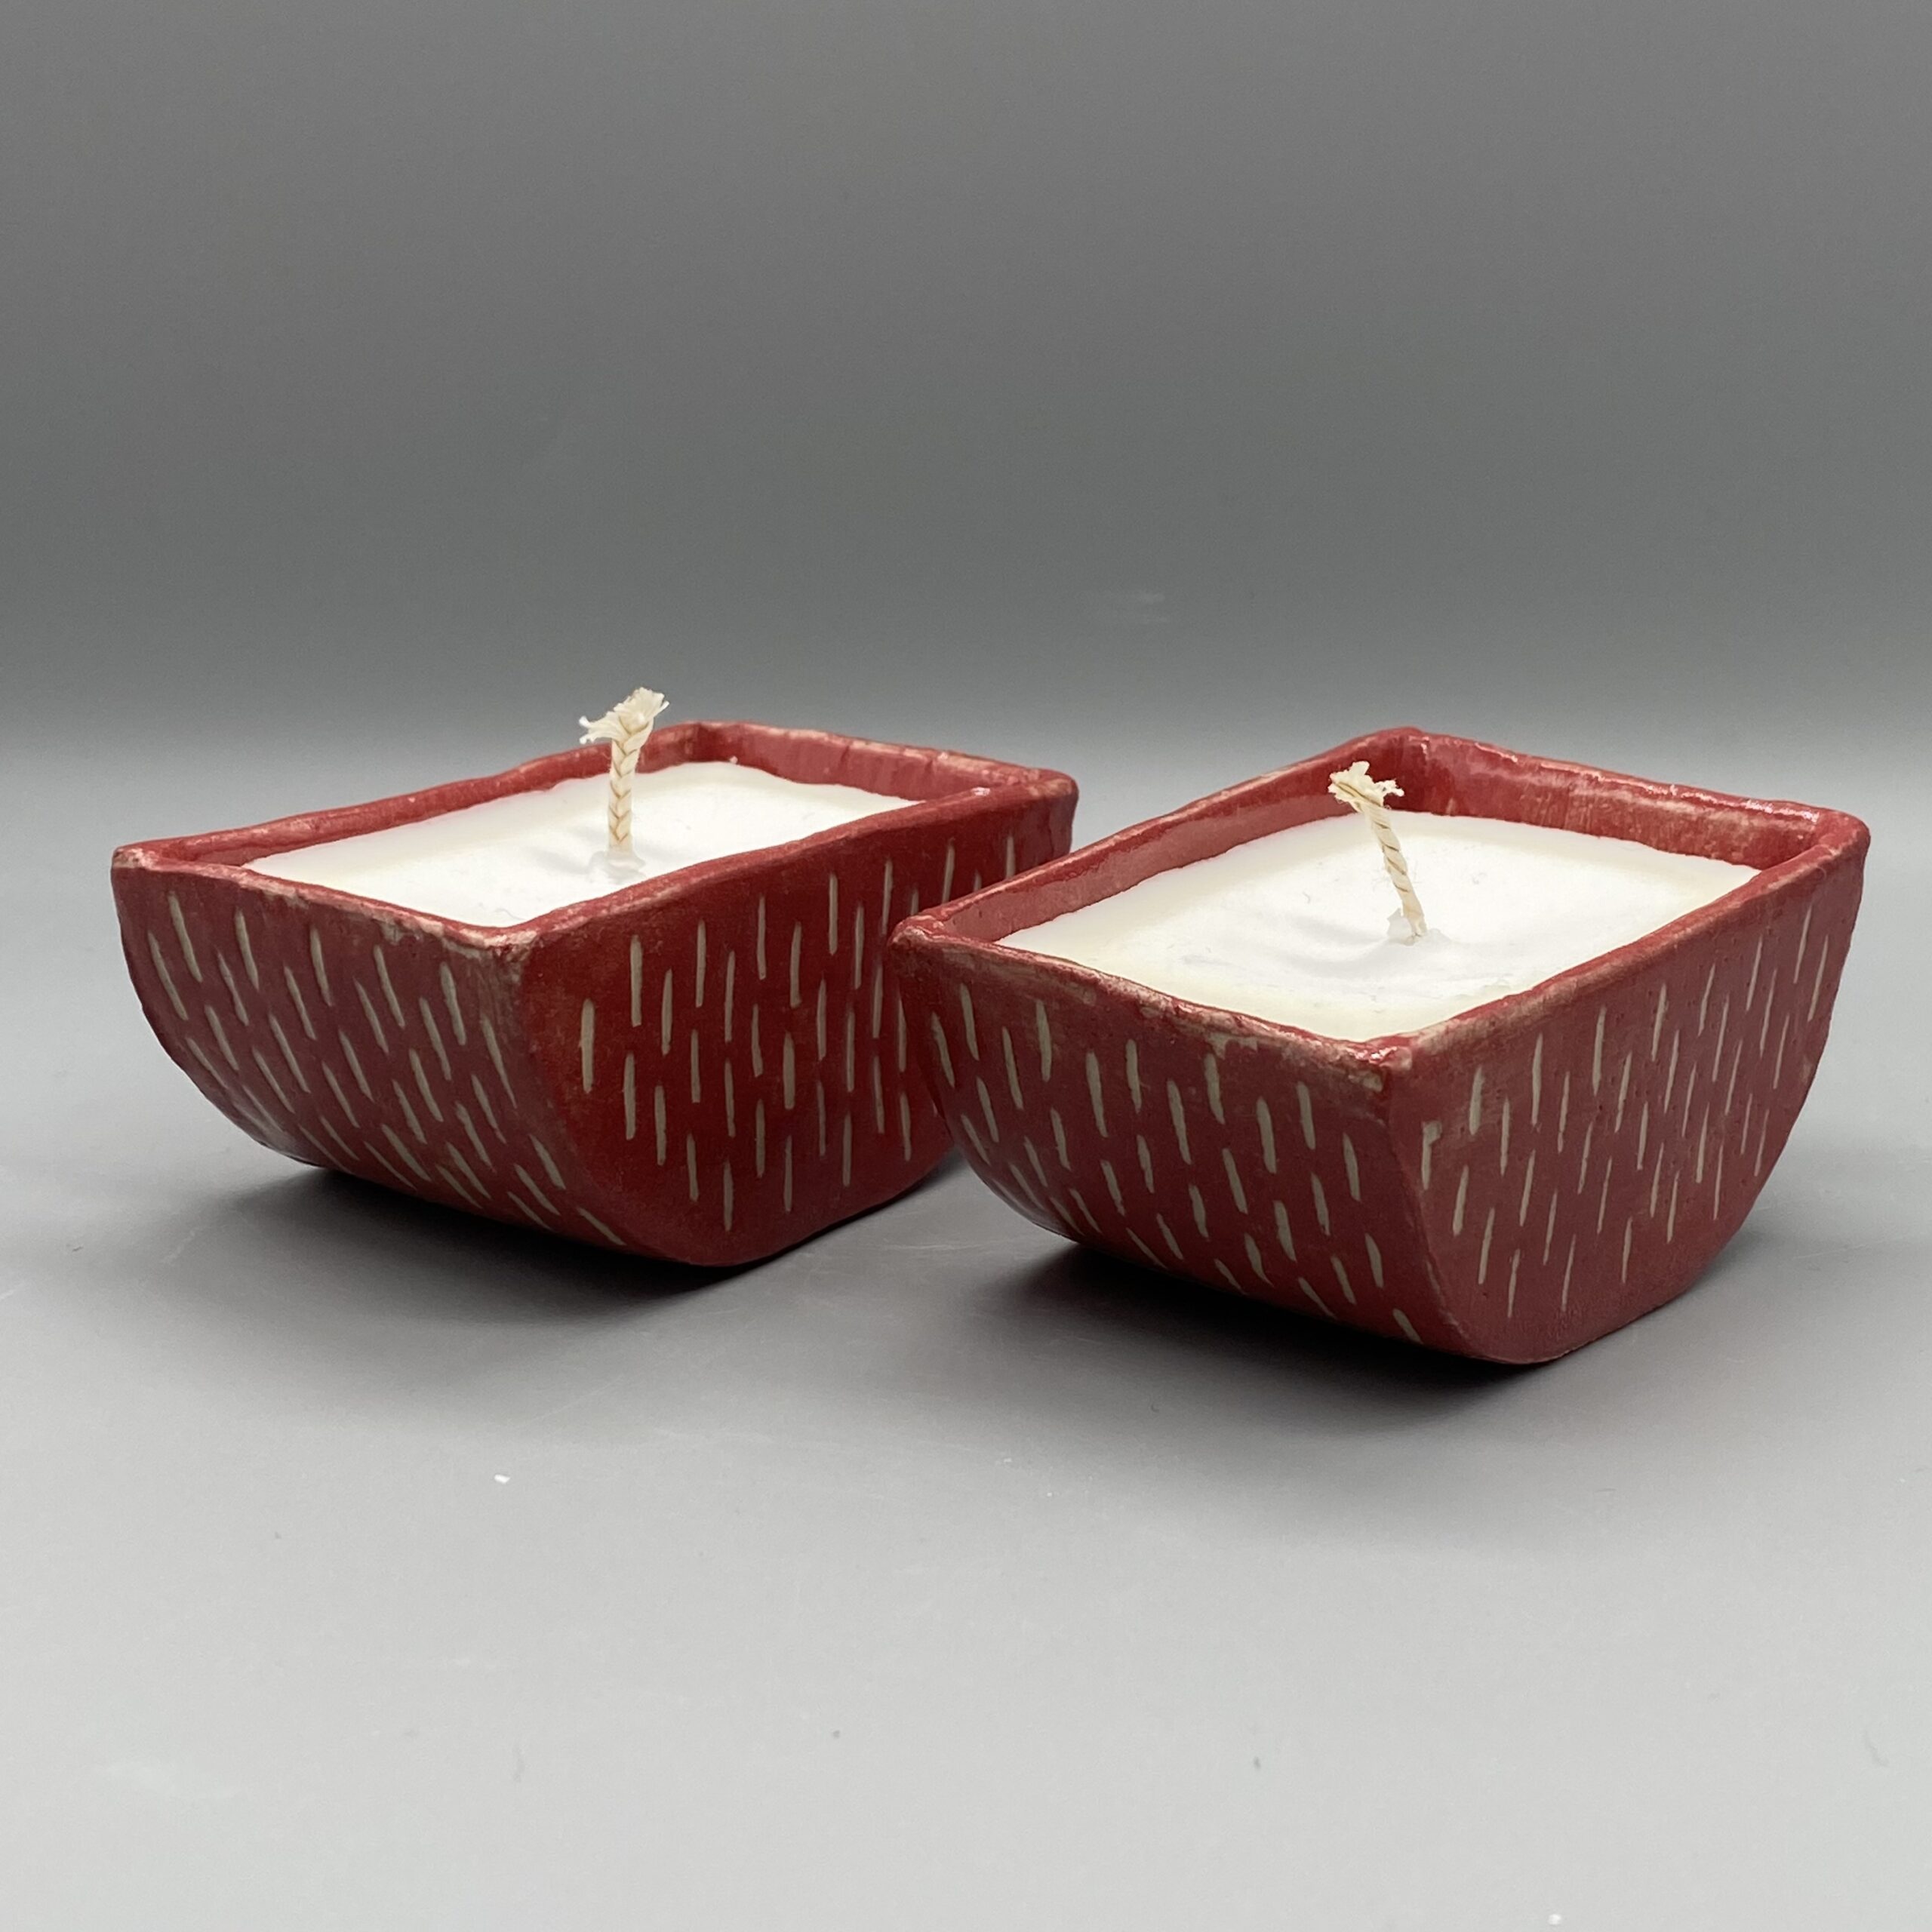 Featured image for “Christmas Candle in Ceramic Vessel”